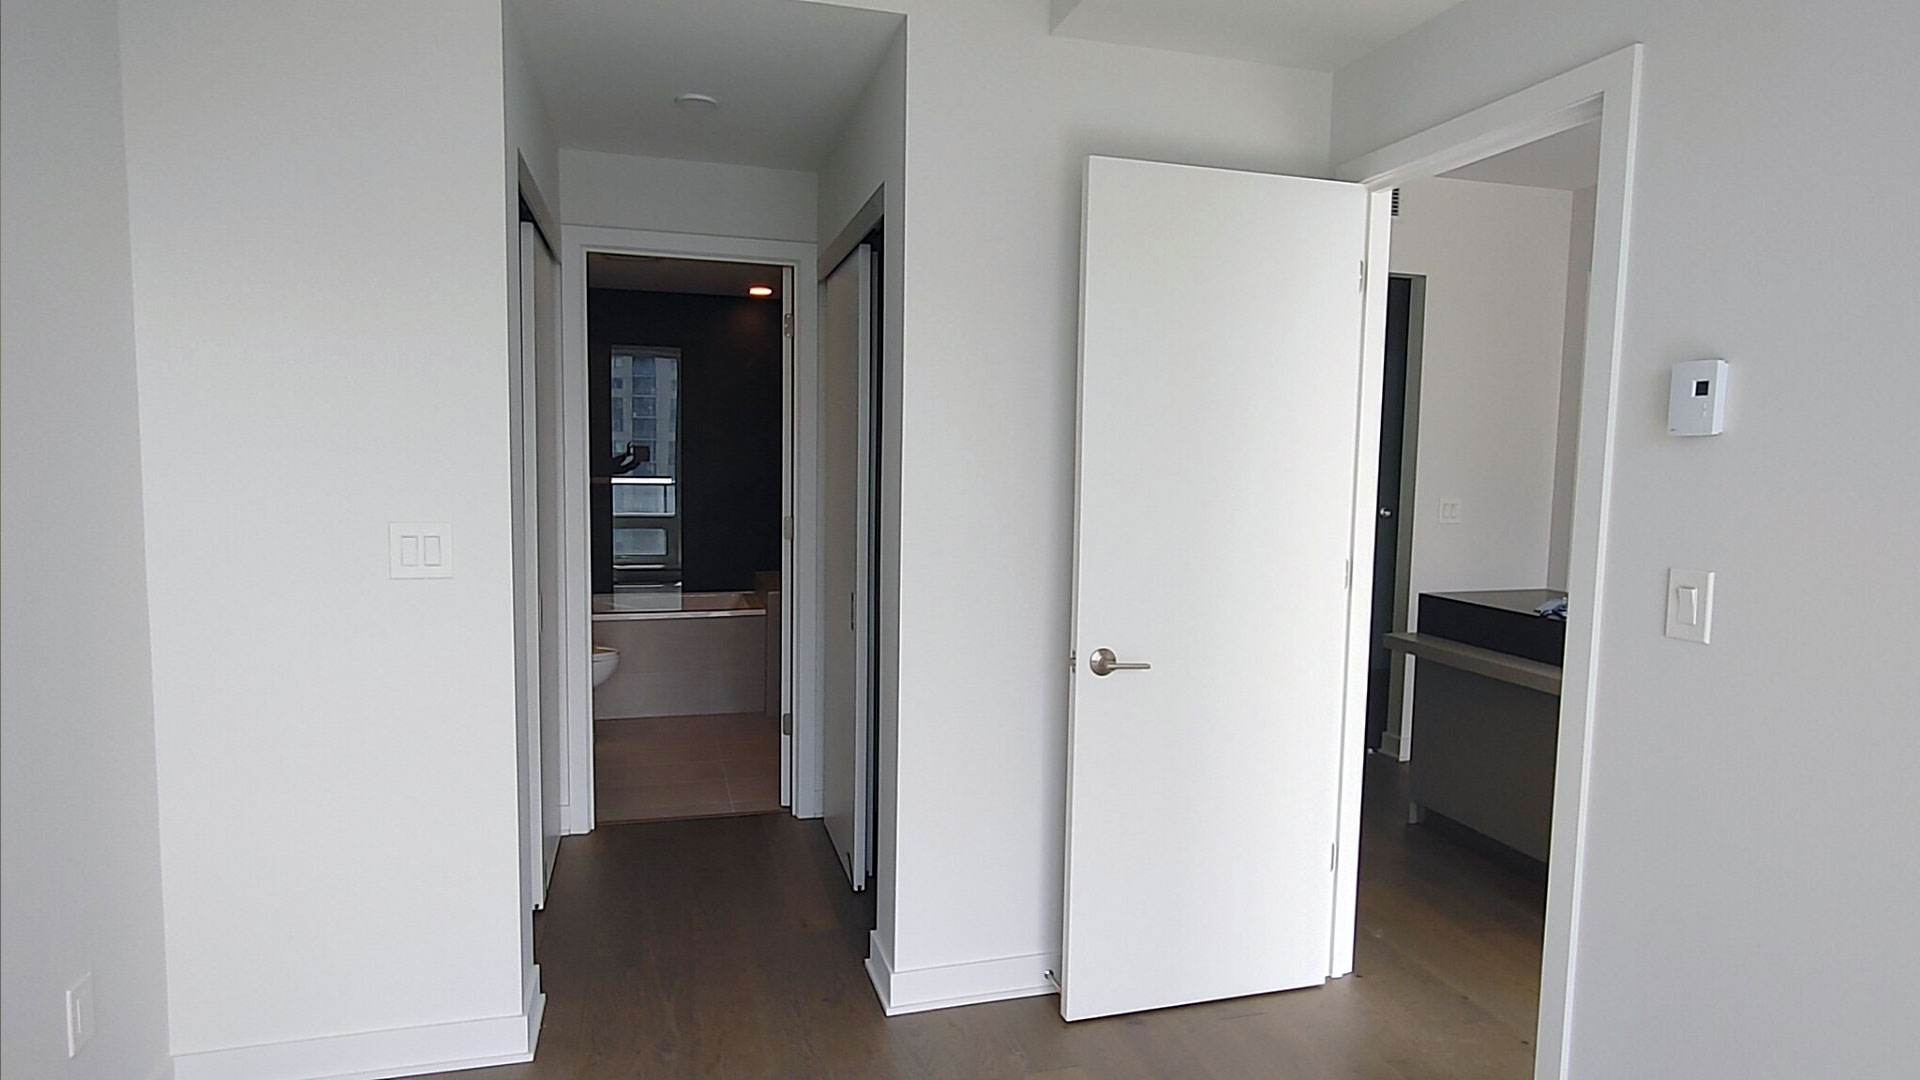 Condo for rent Downtown Montreal in TDC2